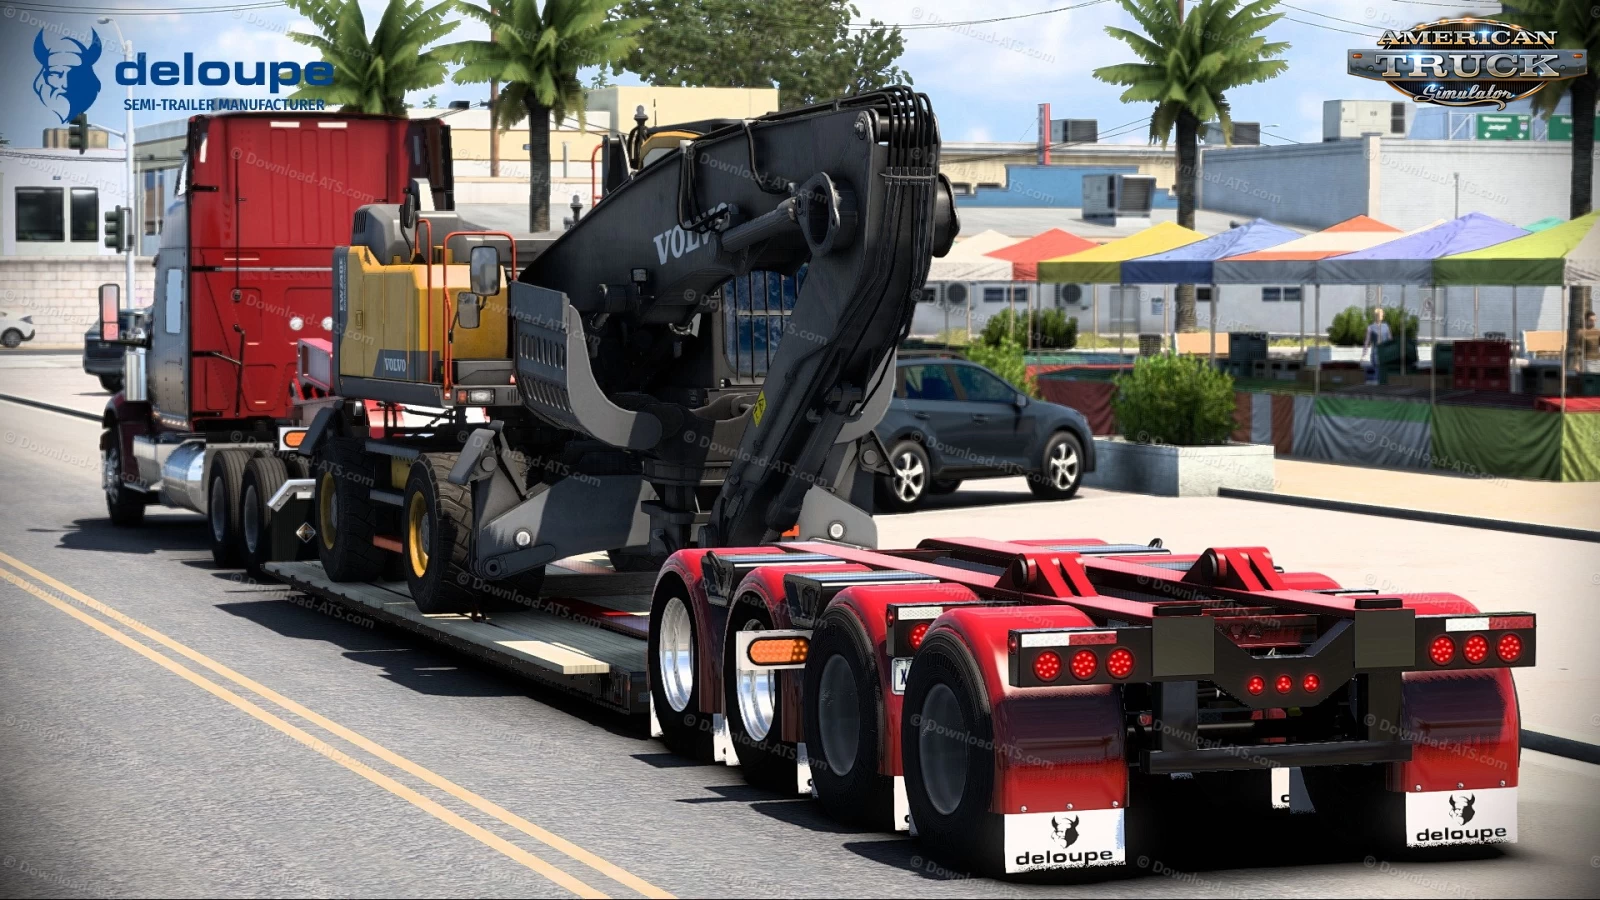 Corby Deloupe Lowboy Trailer v1.2 (1.47.x) for ATS